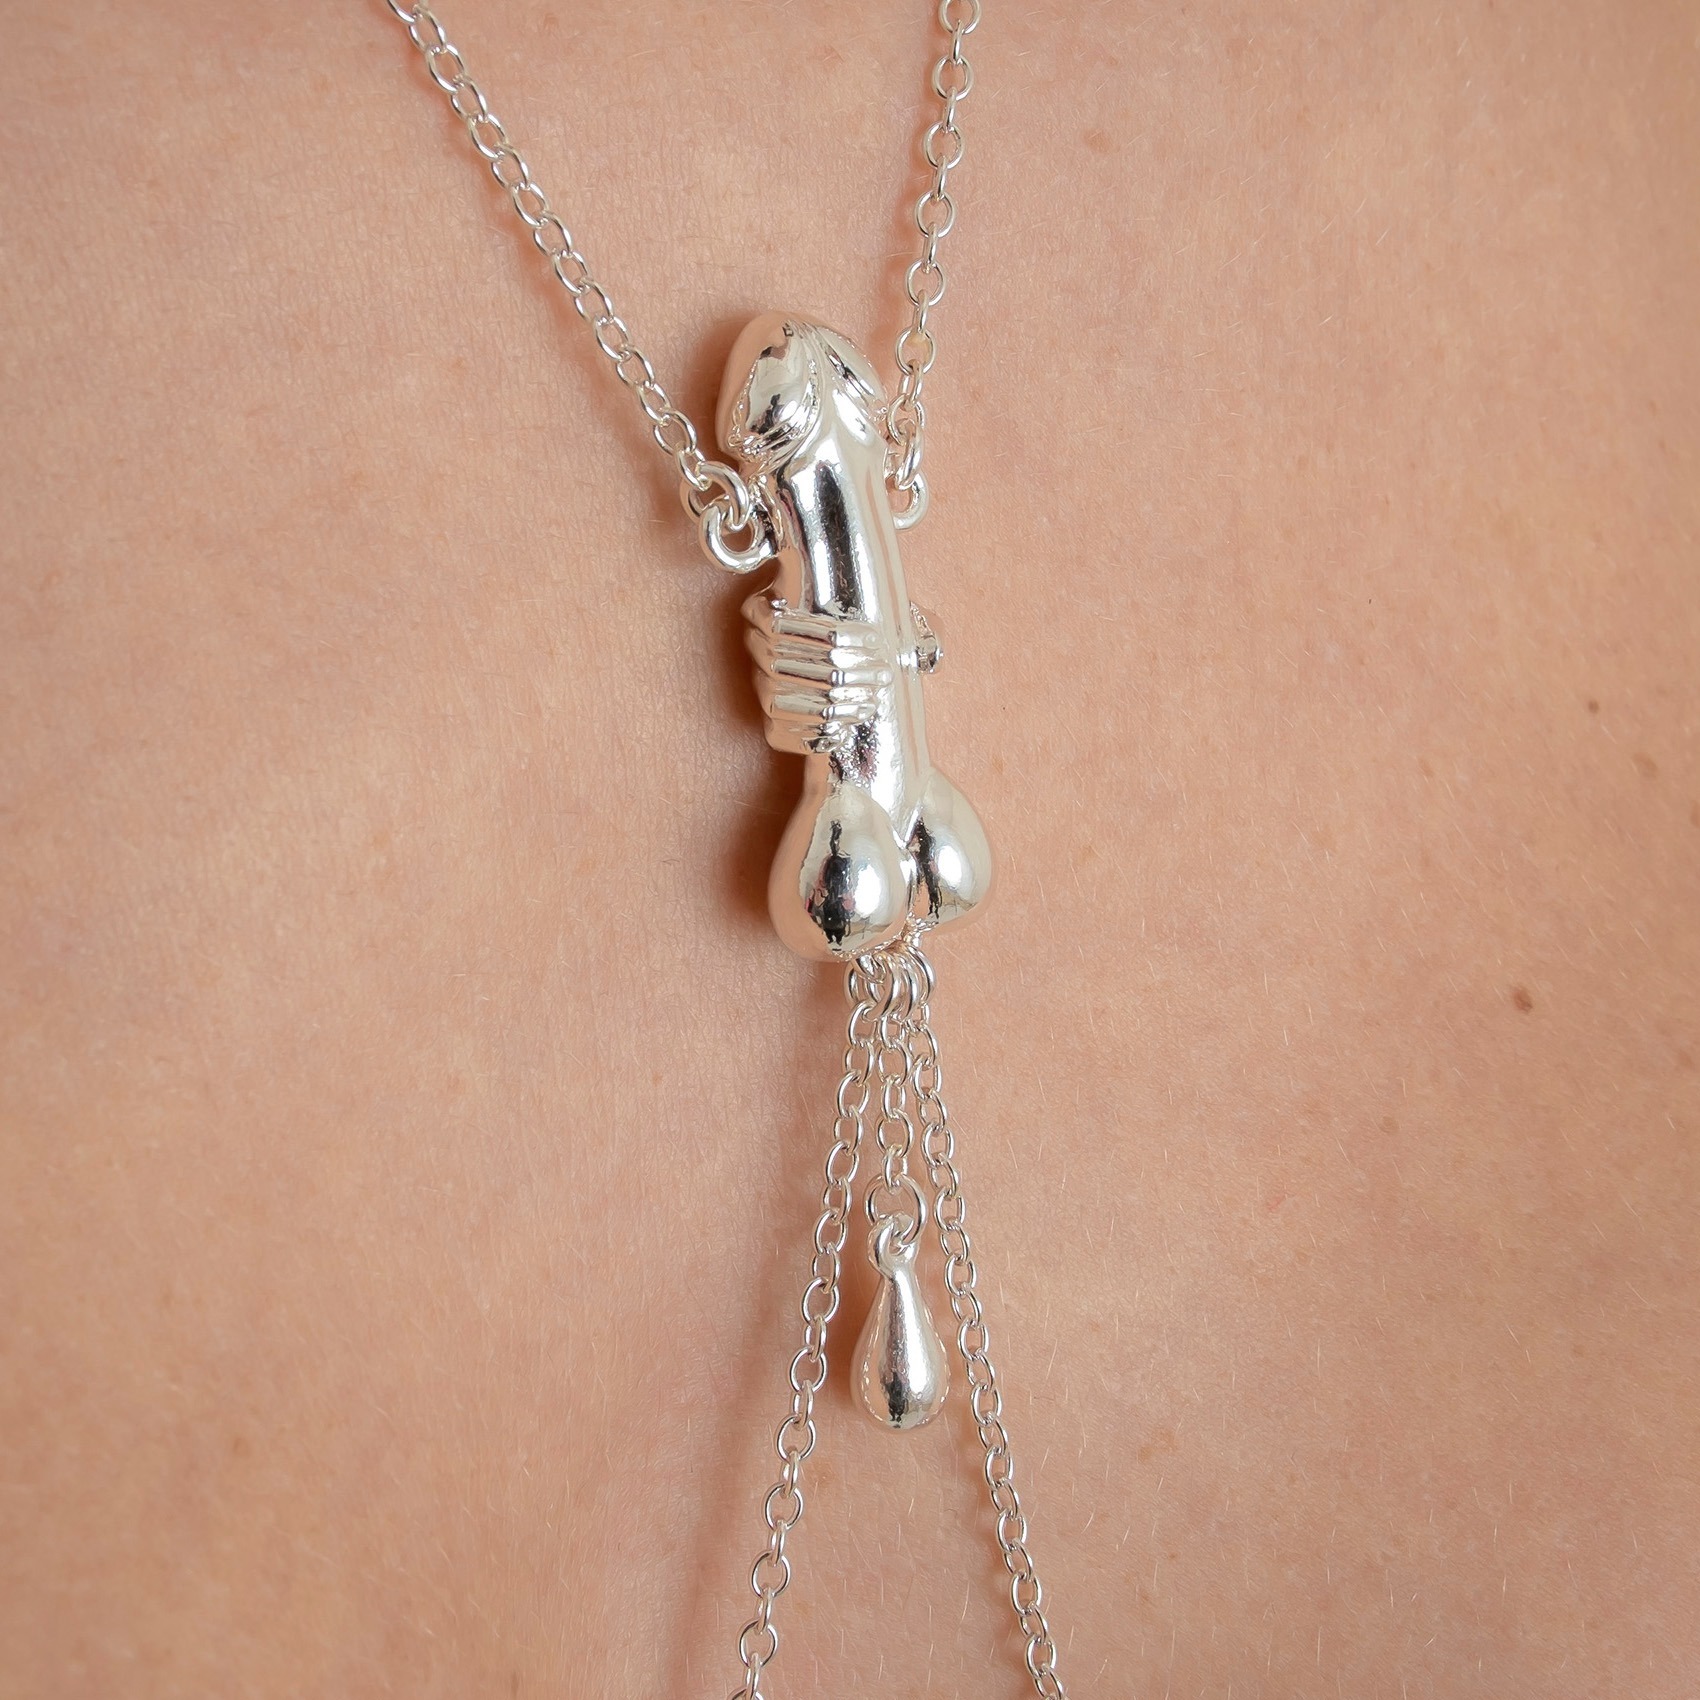 sexy necklace sculpture penis silver